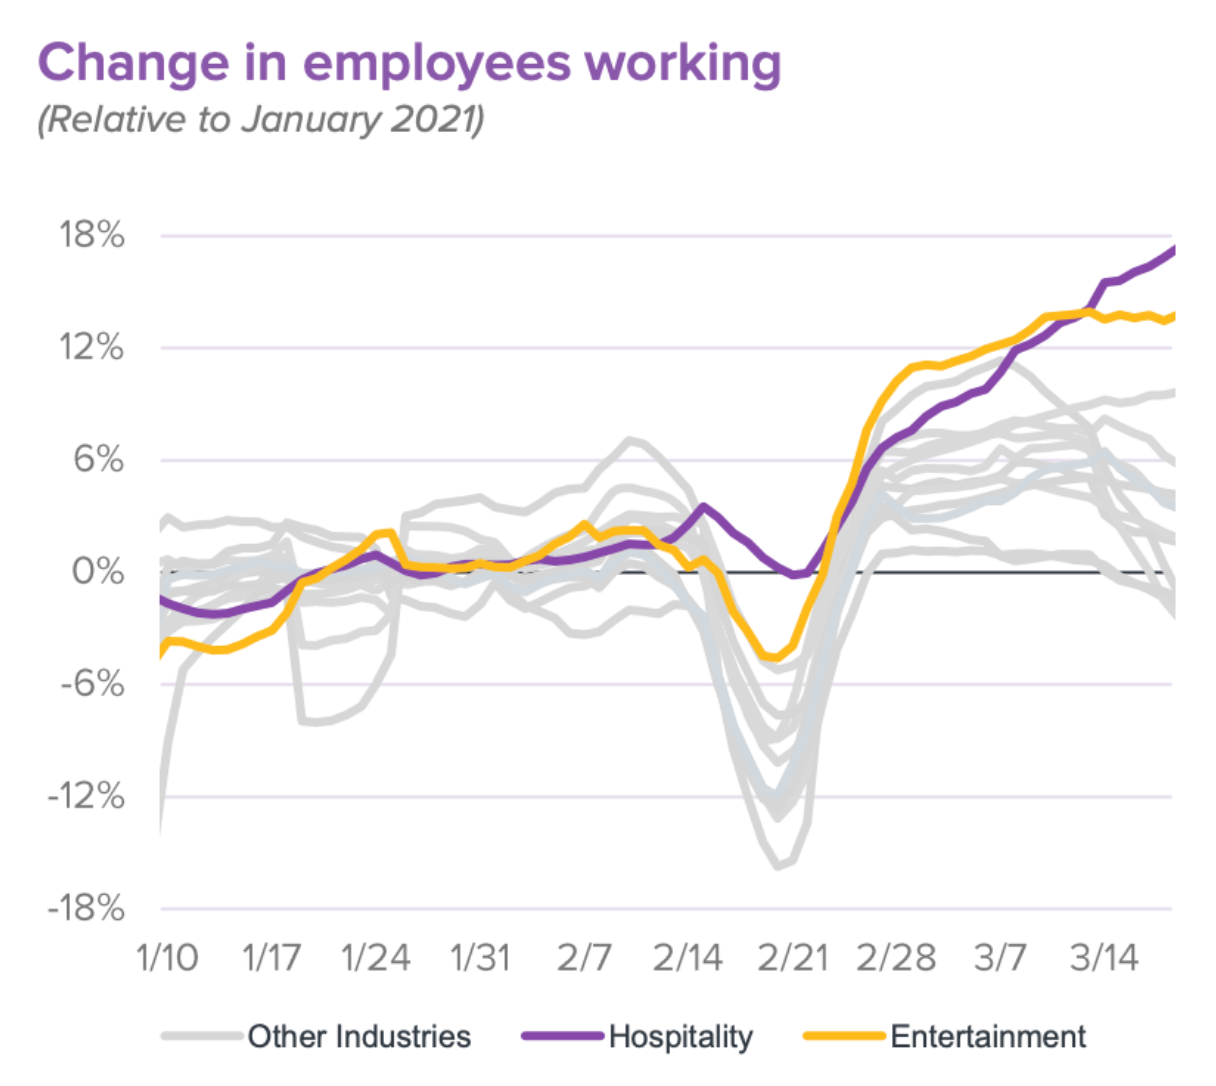 Change in employment by industry by week in 2021, according to data published by Homebase